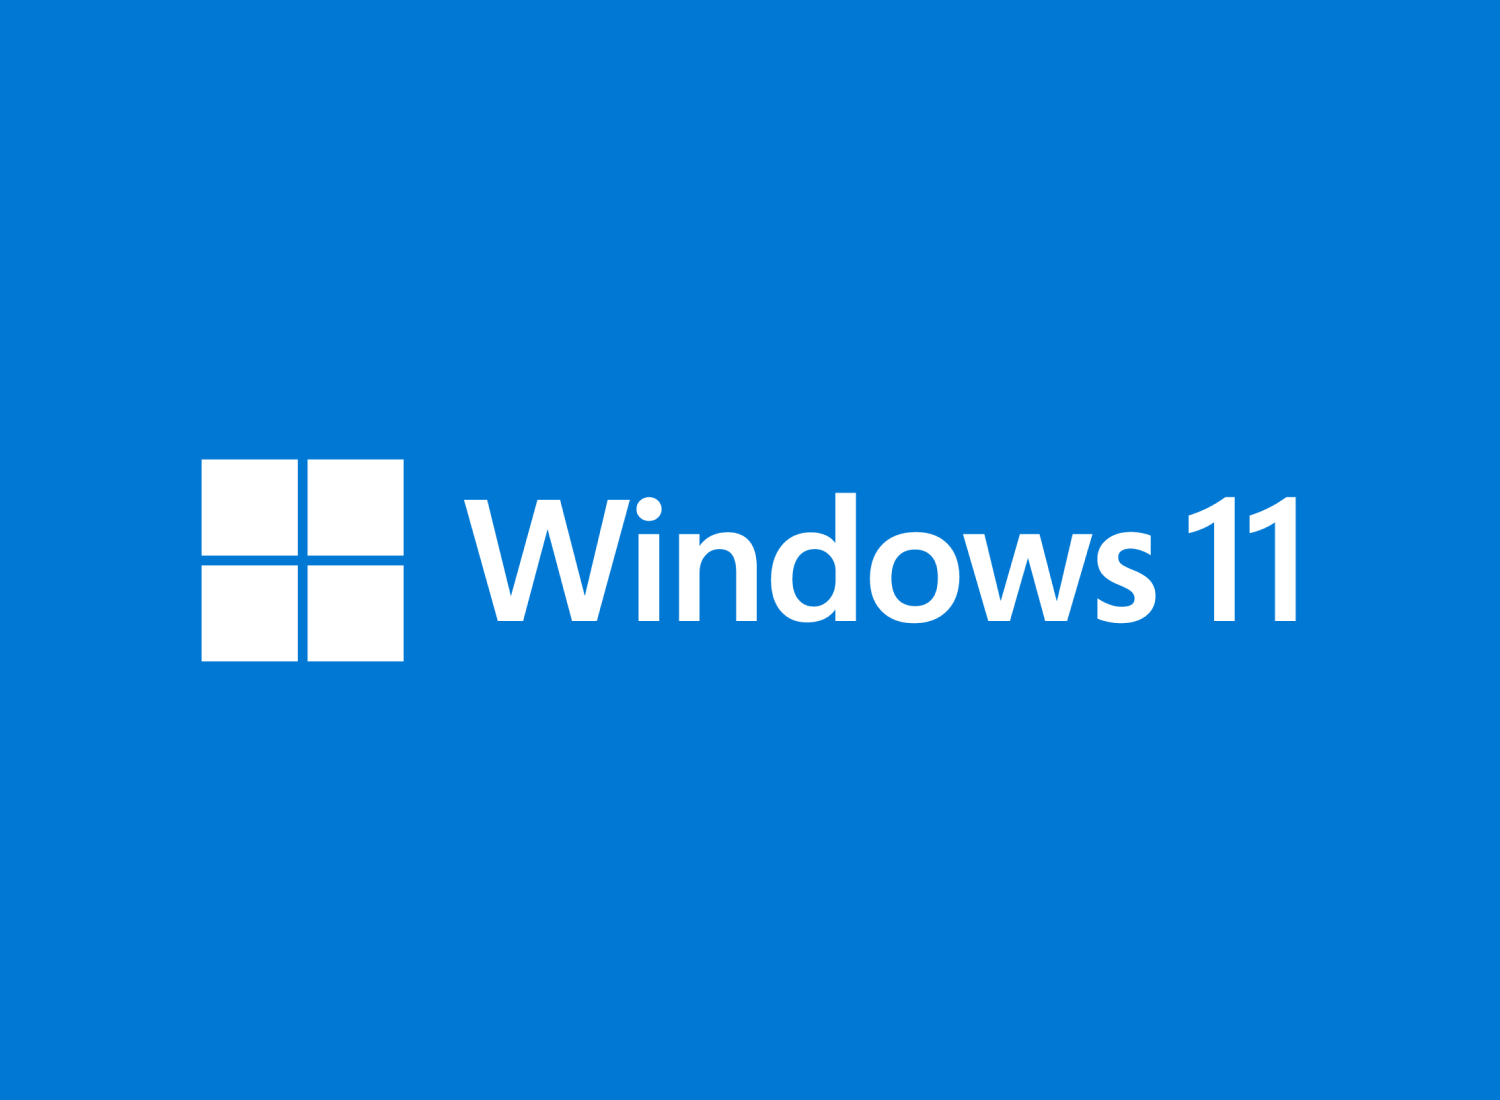 Announcing Windows 11 Insider Preview Build 22621.450 and 22622.450